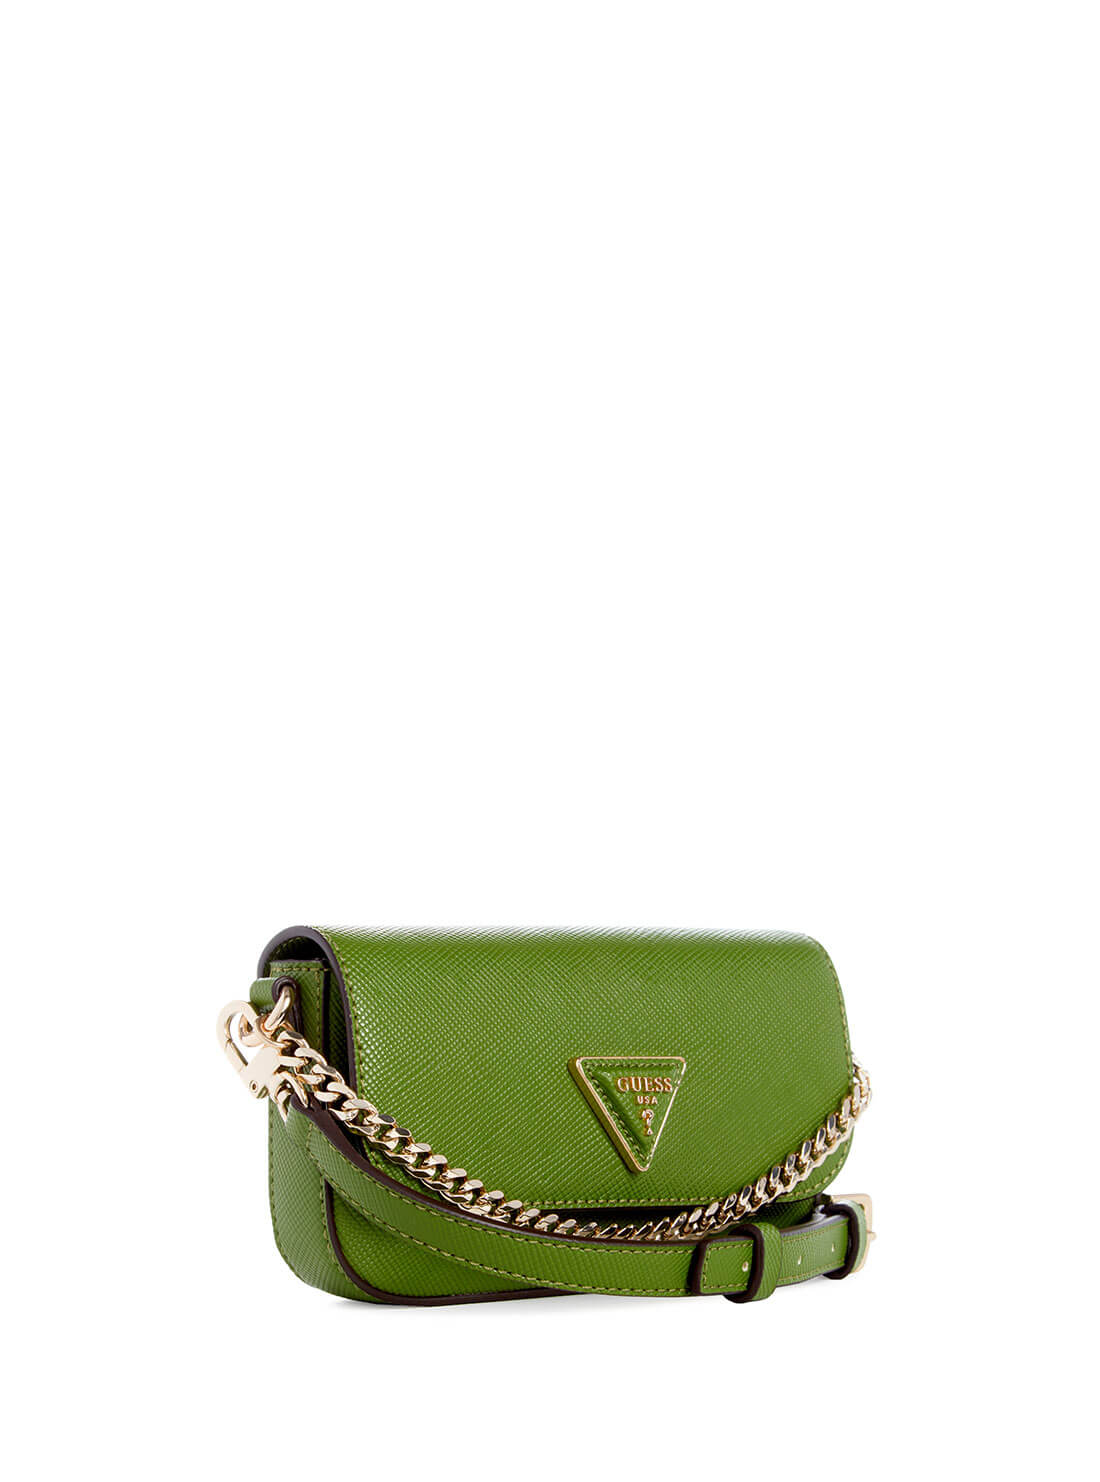 Women's Green Brynlee Micro Mini Shoulder Bag front view alternative